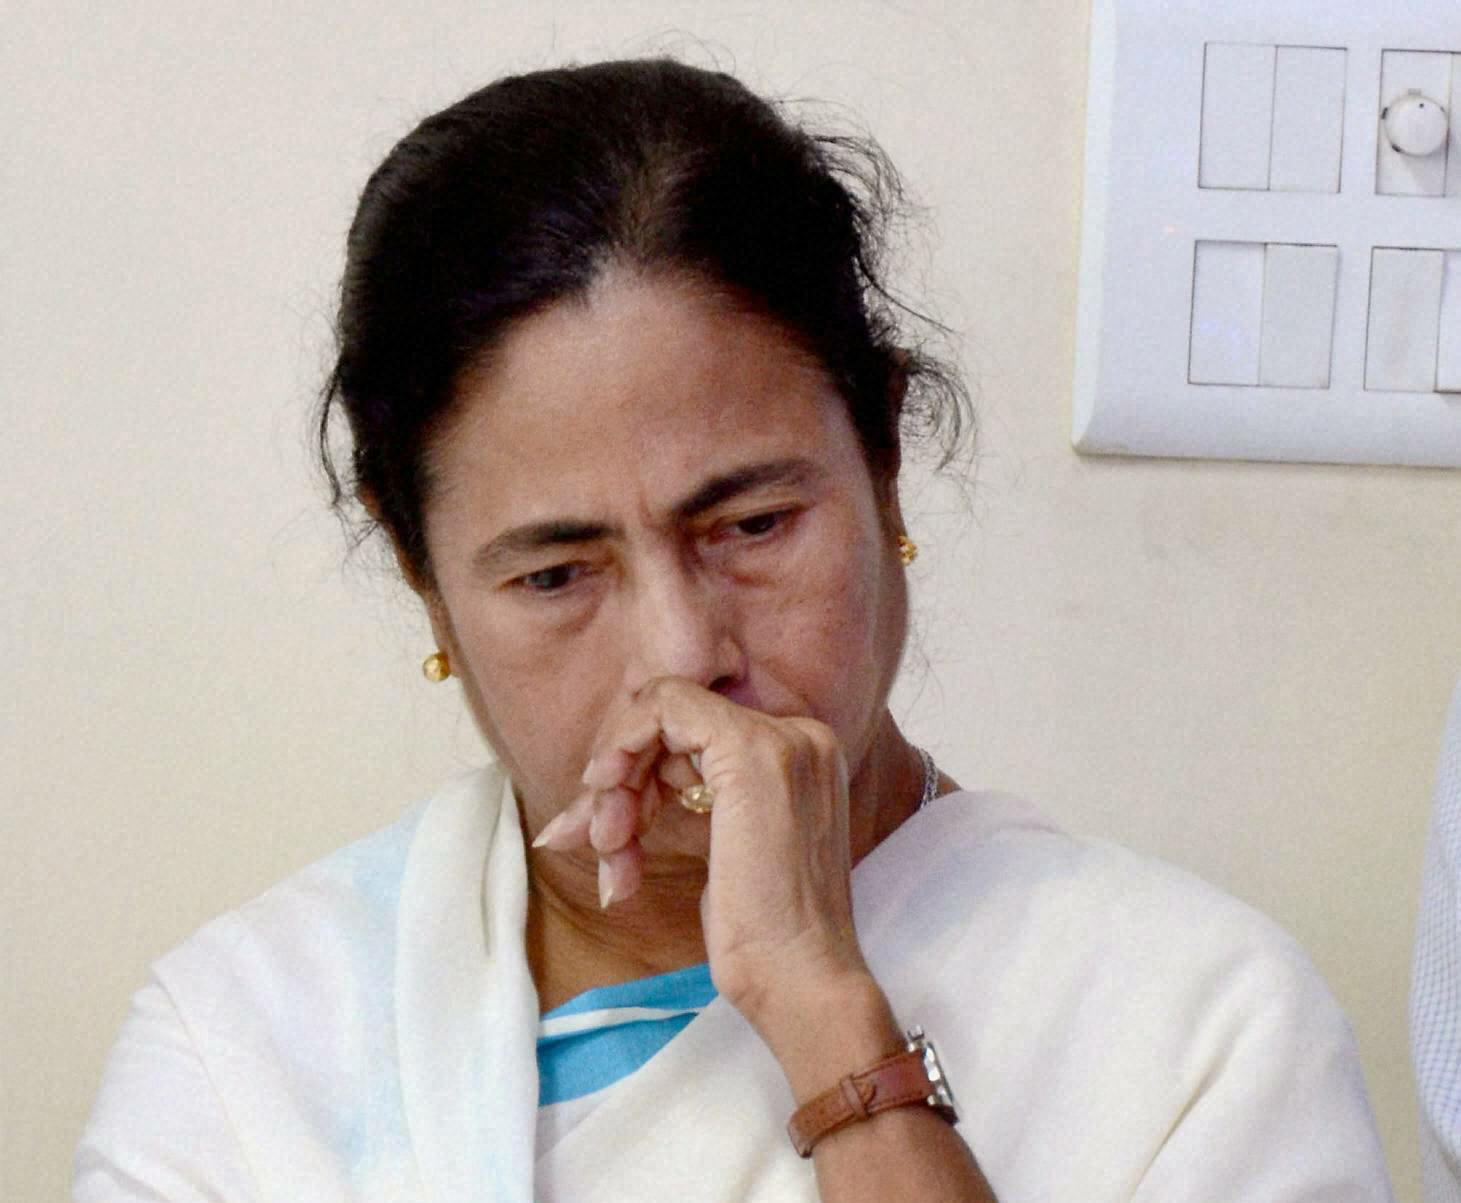 Parties welcome Mamata's suggestion to unite against BJP